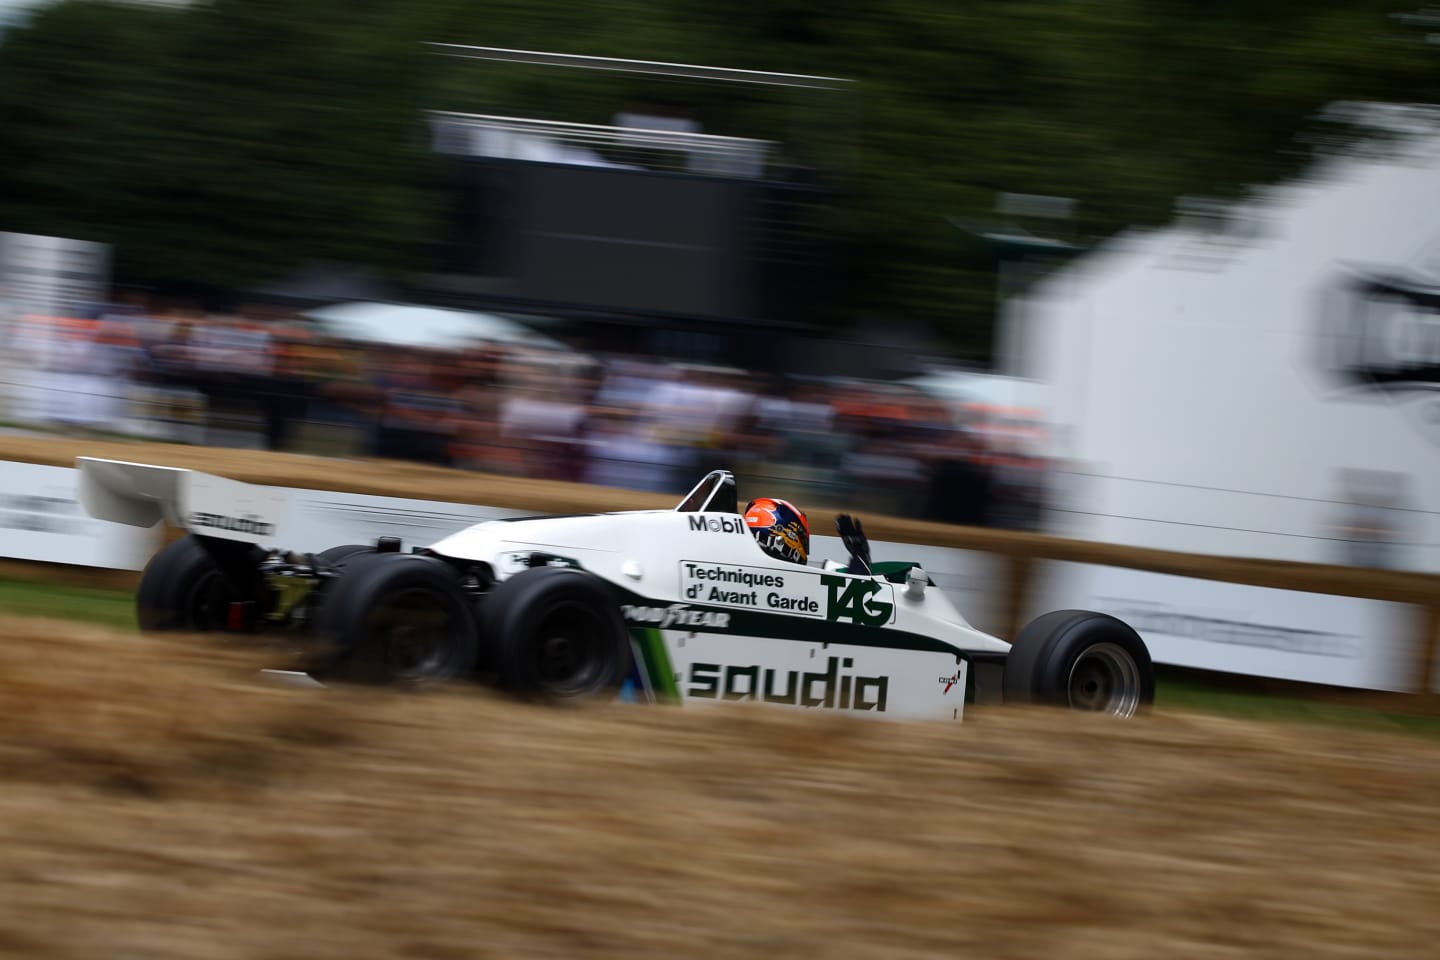 www.sutton-images.com Karun Chandhok (IND) Williams FW08B at Goodwood Festival of Speed, Goodwood, England, 30 June - 2 July 2017. © Sutton Images